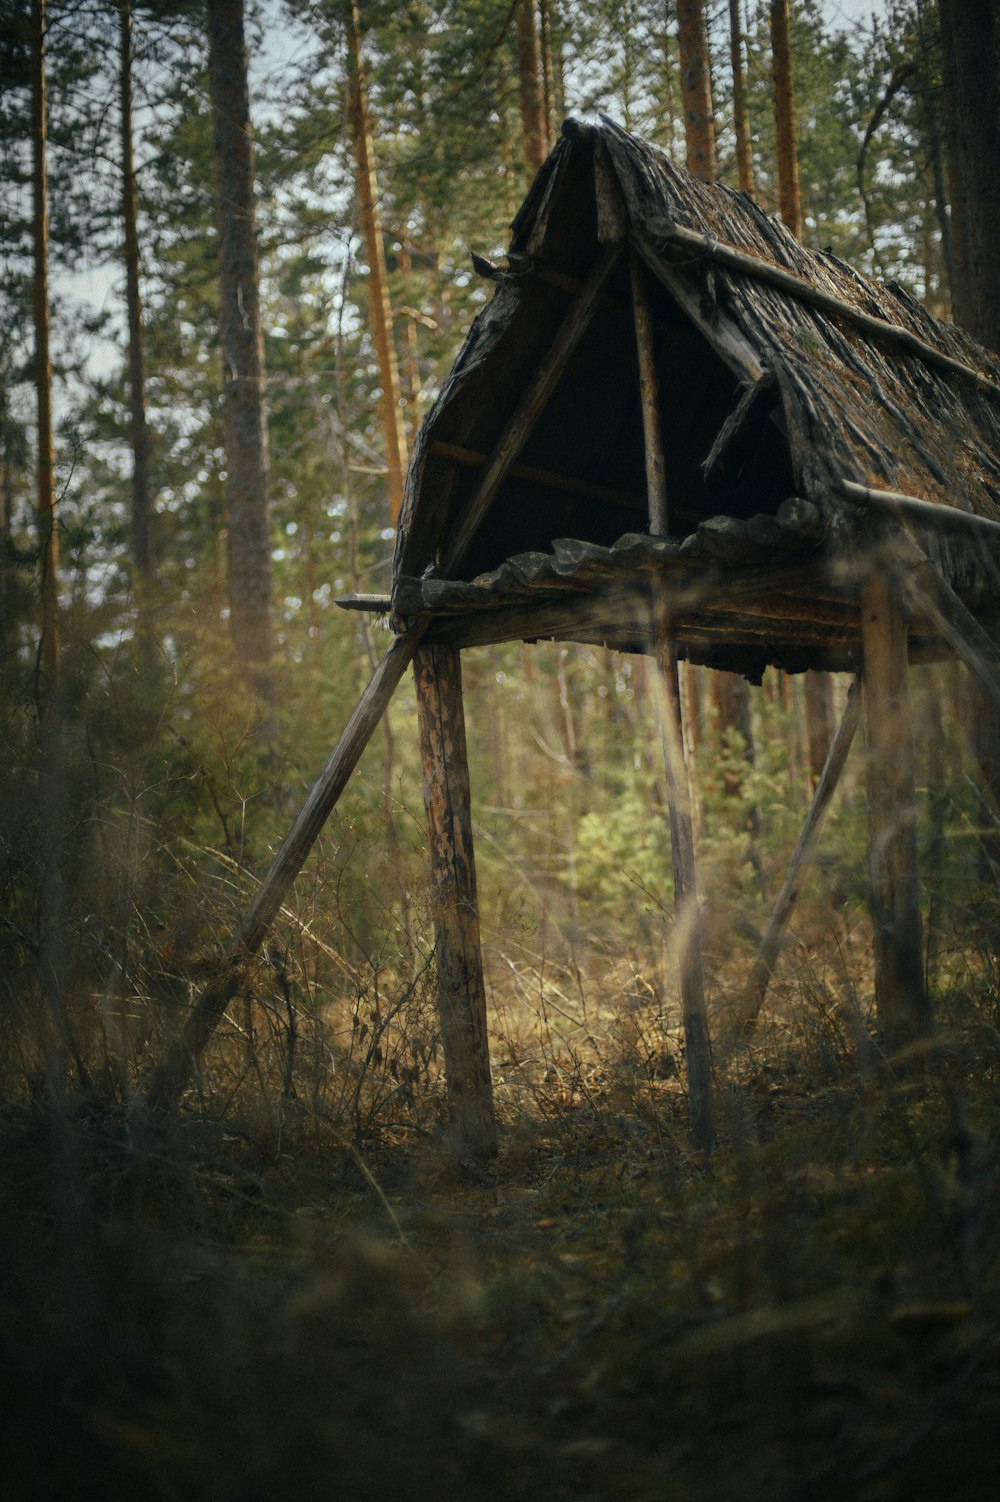 a small hut in the middle of a forest